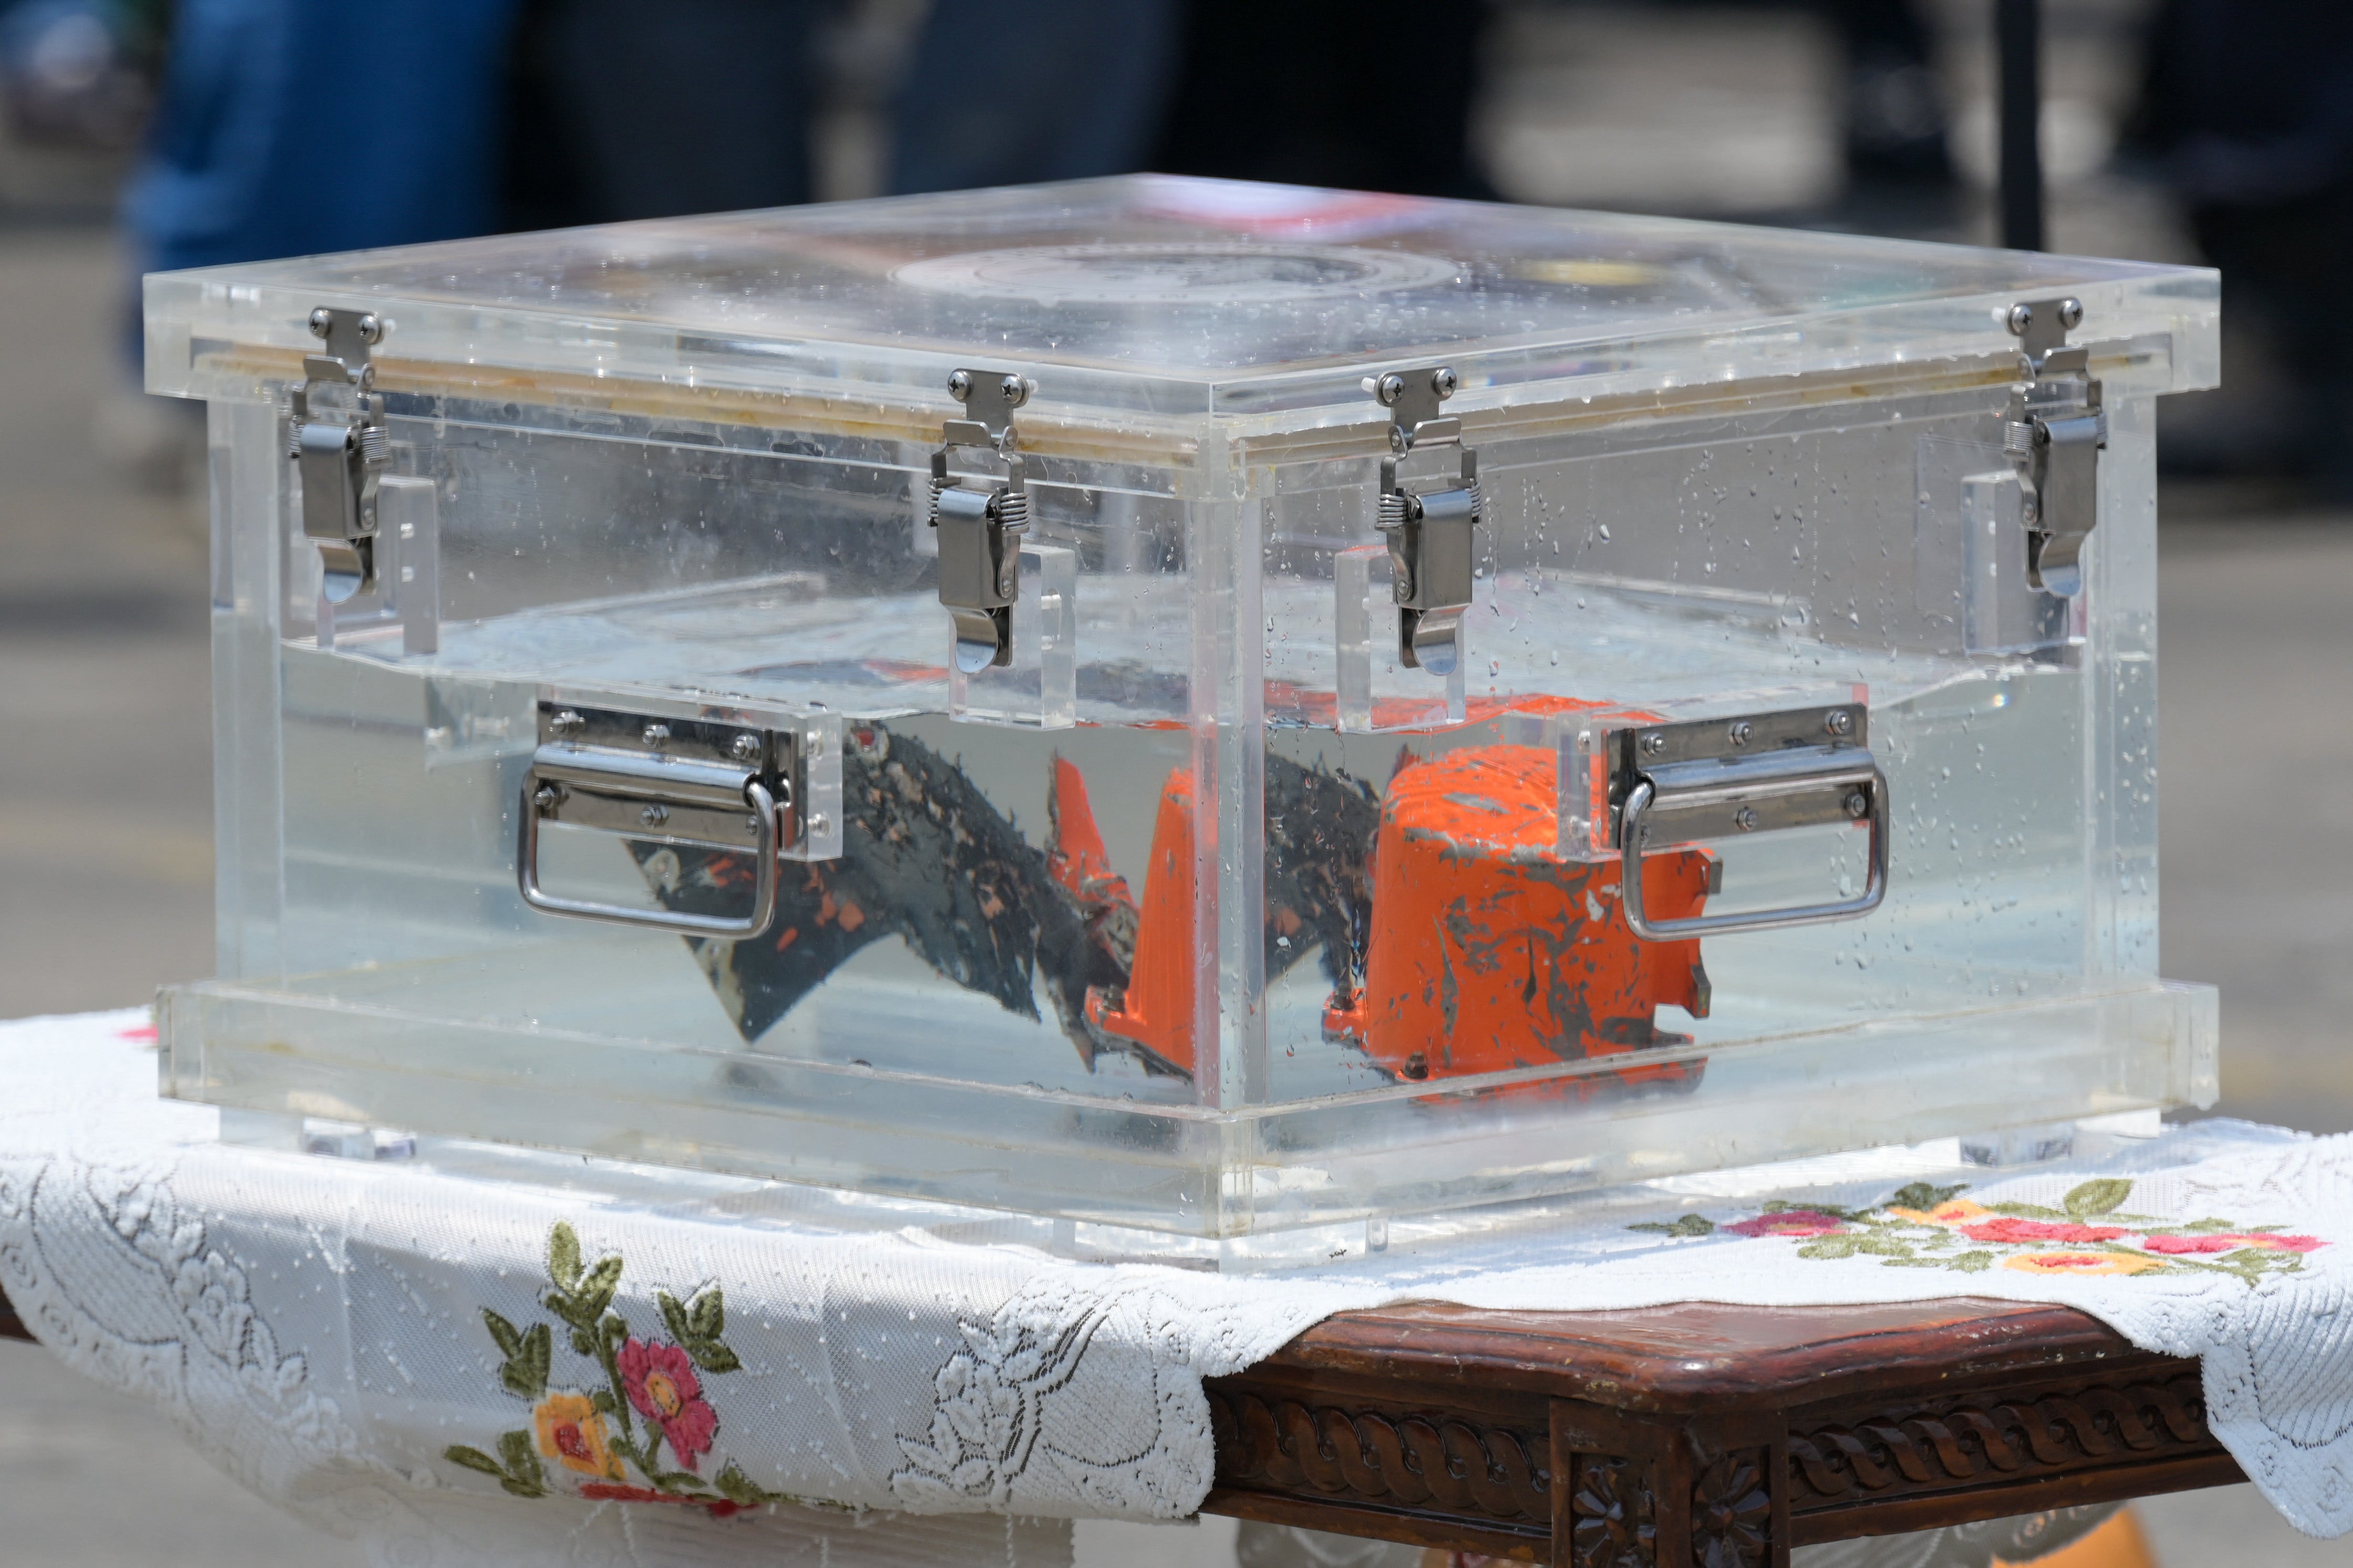 The cockpit voice recorder placed on a table at a port in Jakarta, on 31 March, 2021, after it was recovered during search operations for Sriwijaya jet